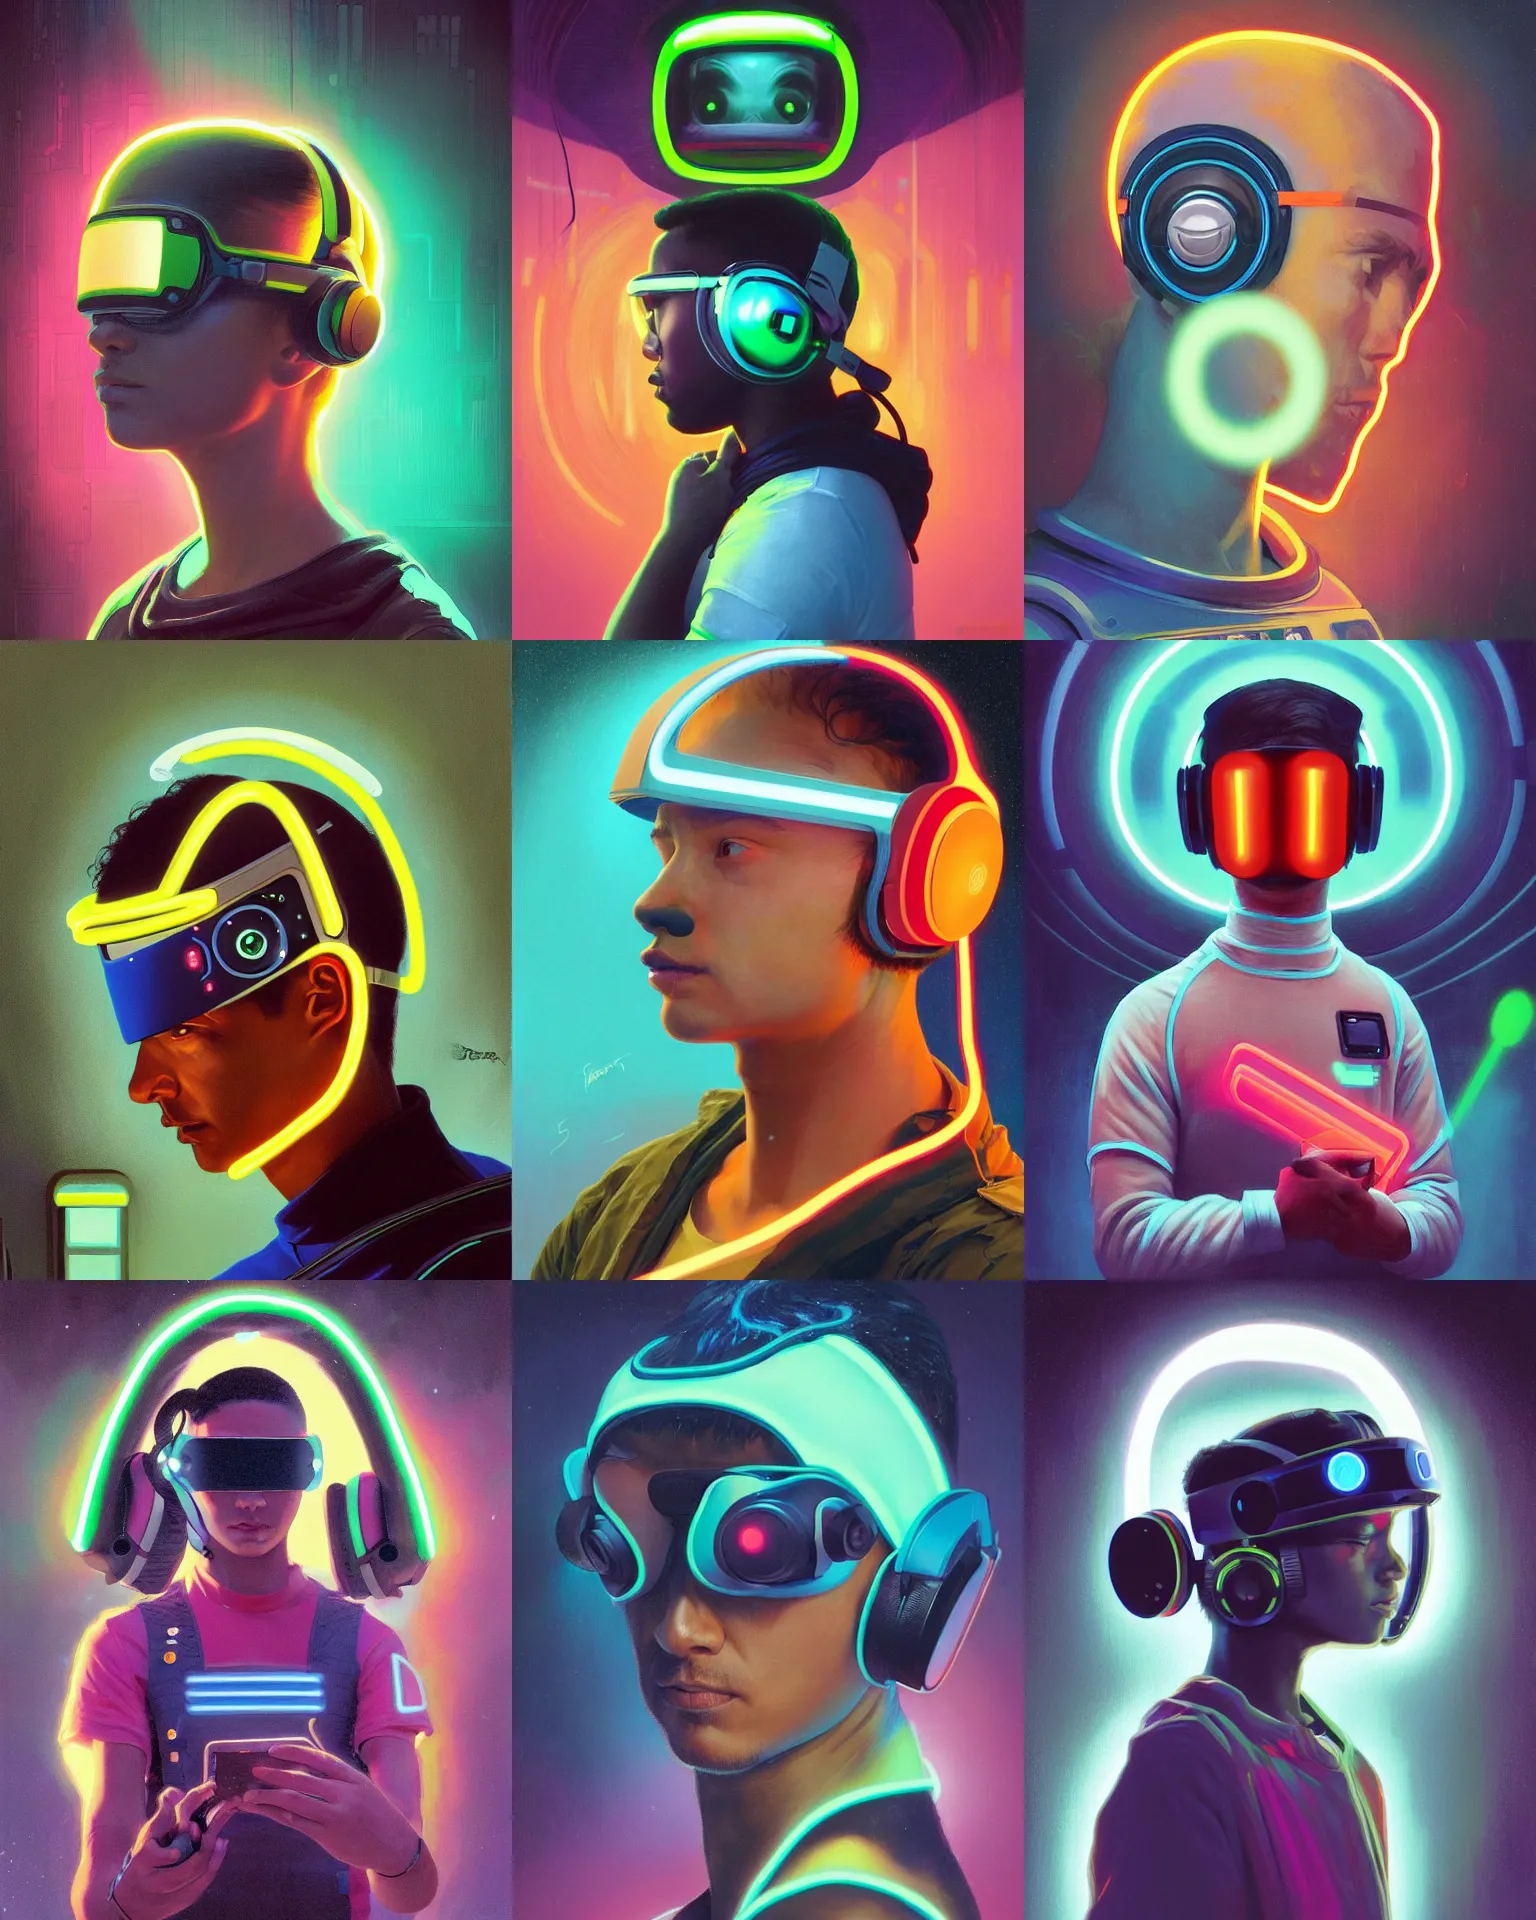 Prompt: future coder looking on, la forge visor over eyes and sleek neon headphones, neon accents, rim lighting, desaturated headshot portrait painting by dean cornwall, ilya repin, rhads, tom whalen, alex grey, alphonse mucha, donoto giancola, astronaut cyberpunk electric fashion photography